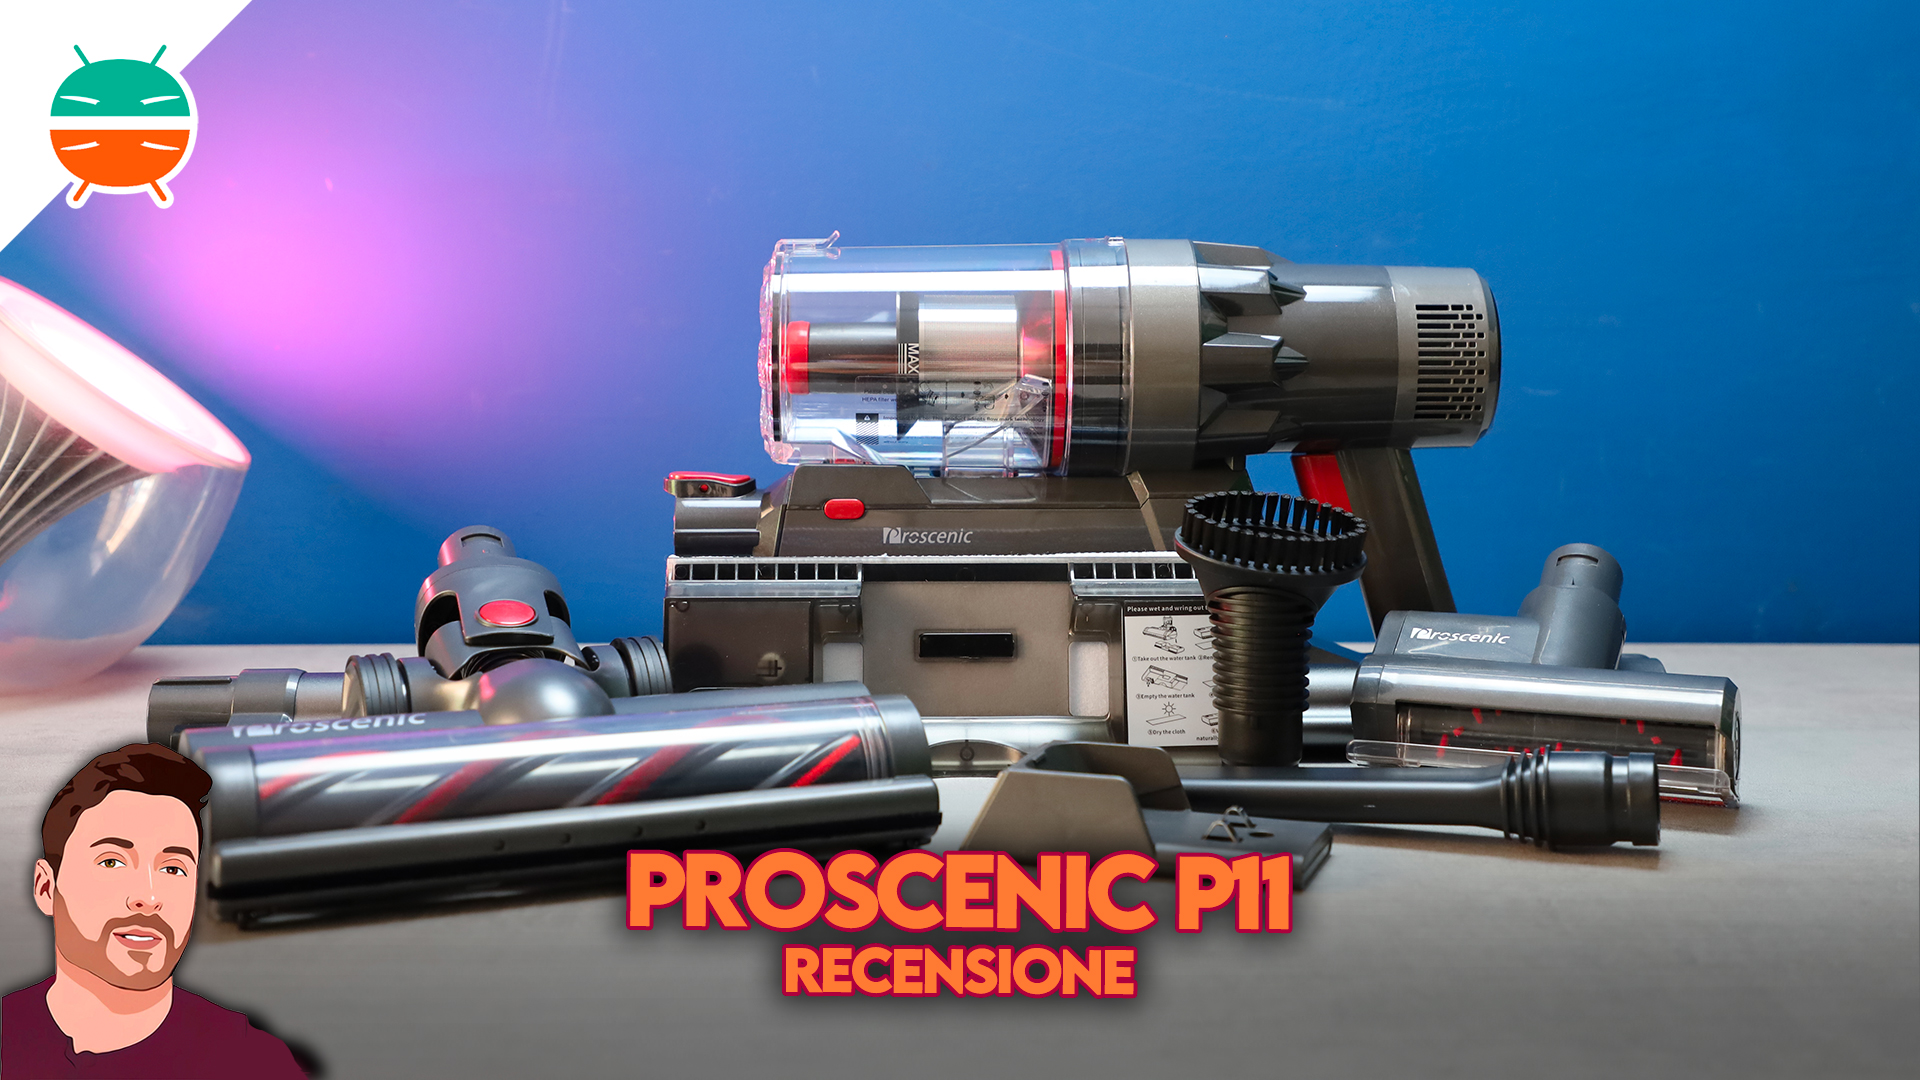 Proscenic P11 review the cyclonic vacuum cleaner that washes